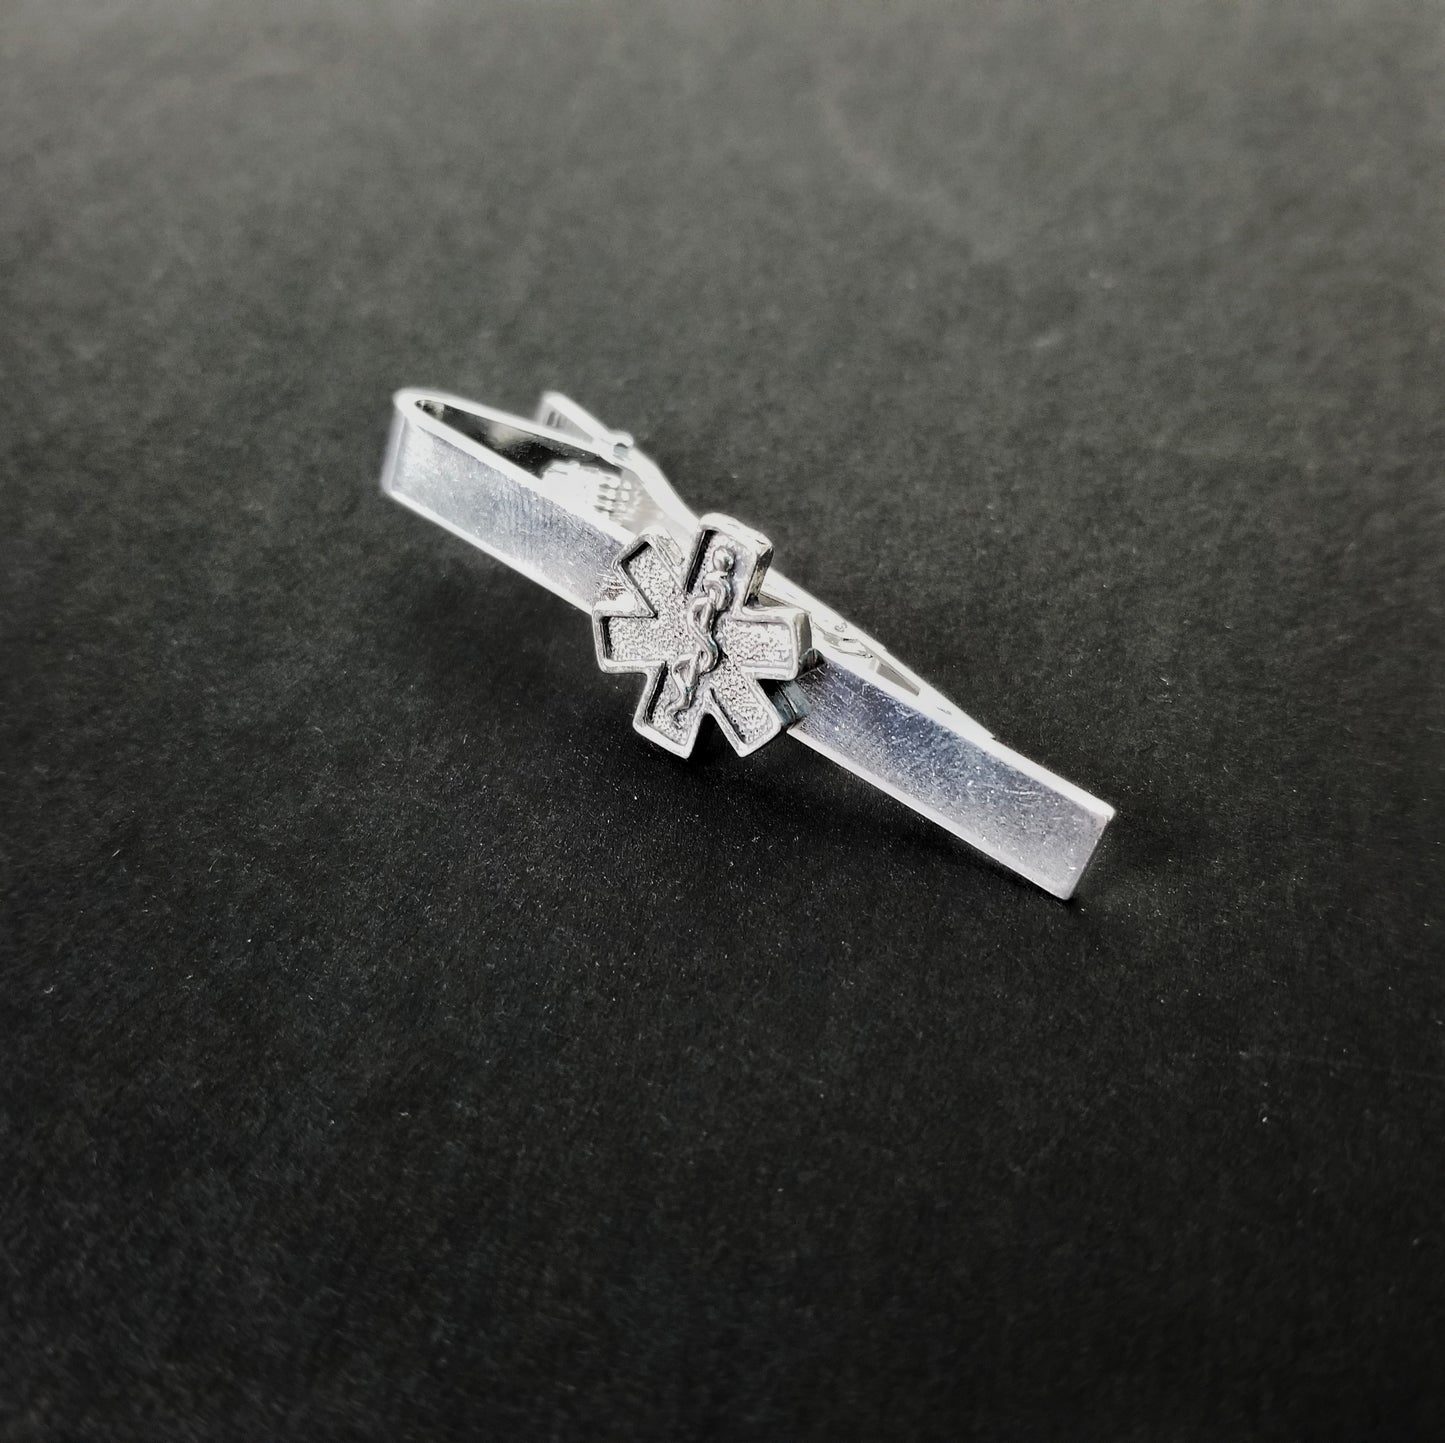 EMS Star of Life Tie Clip